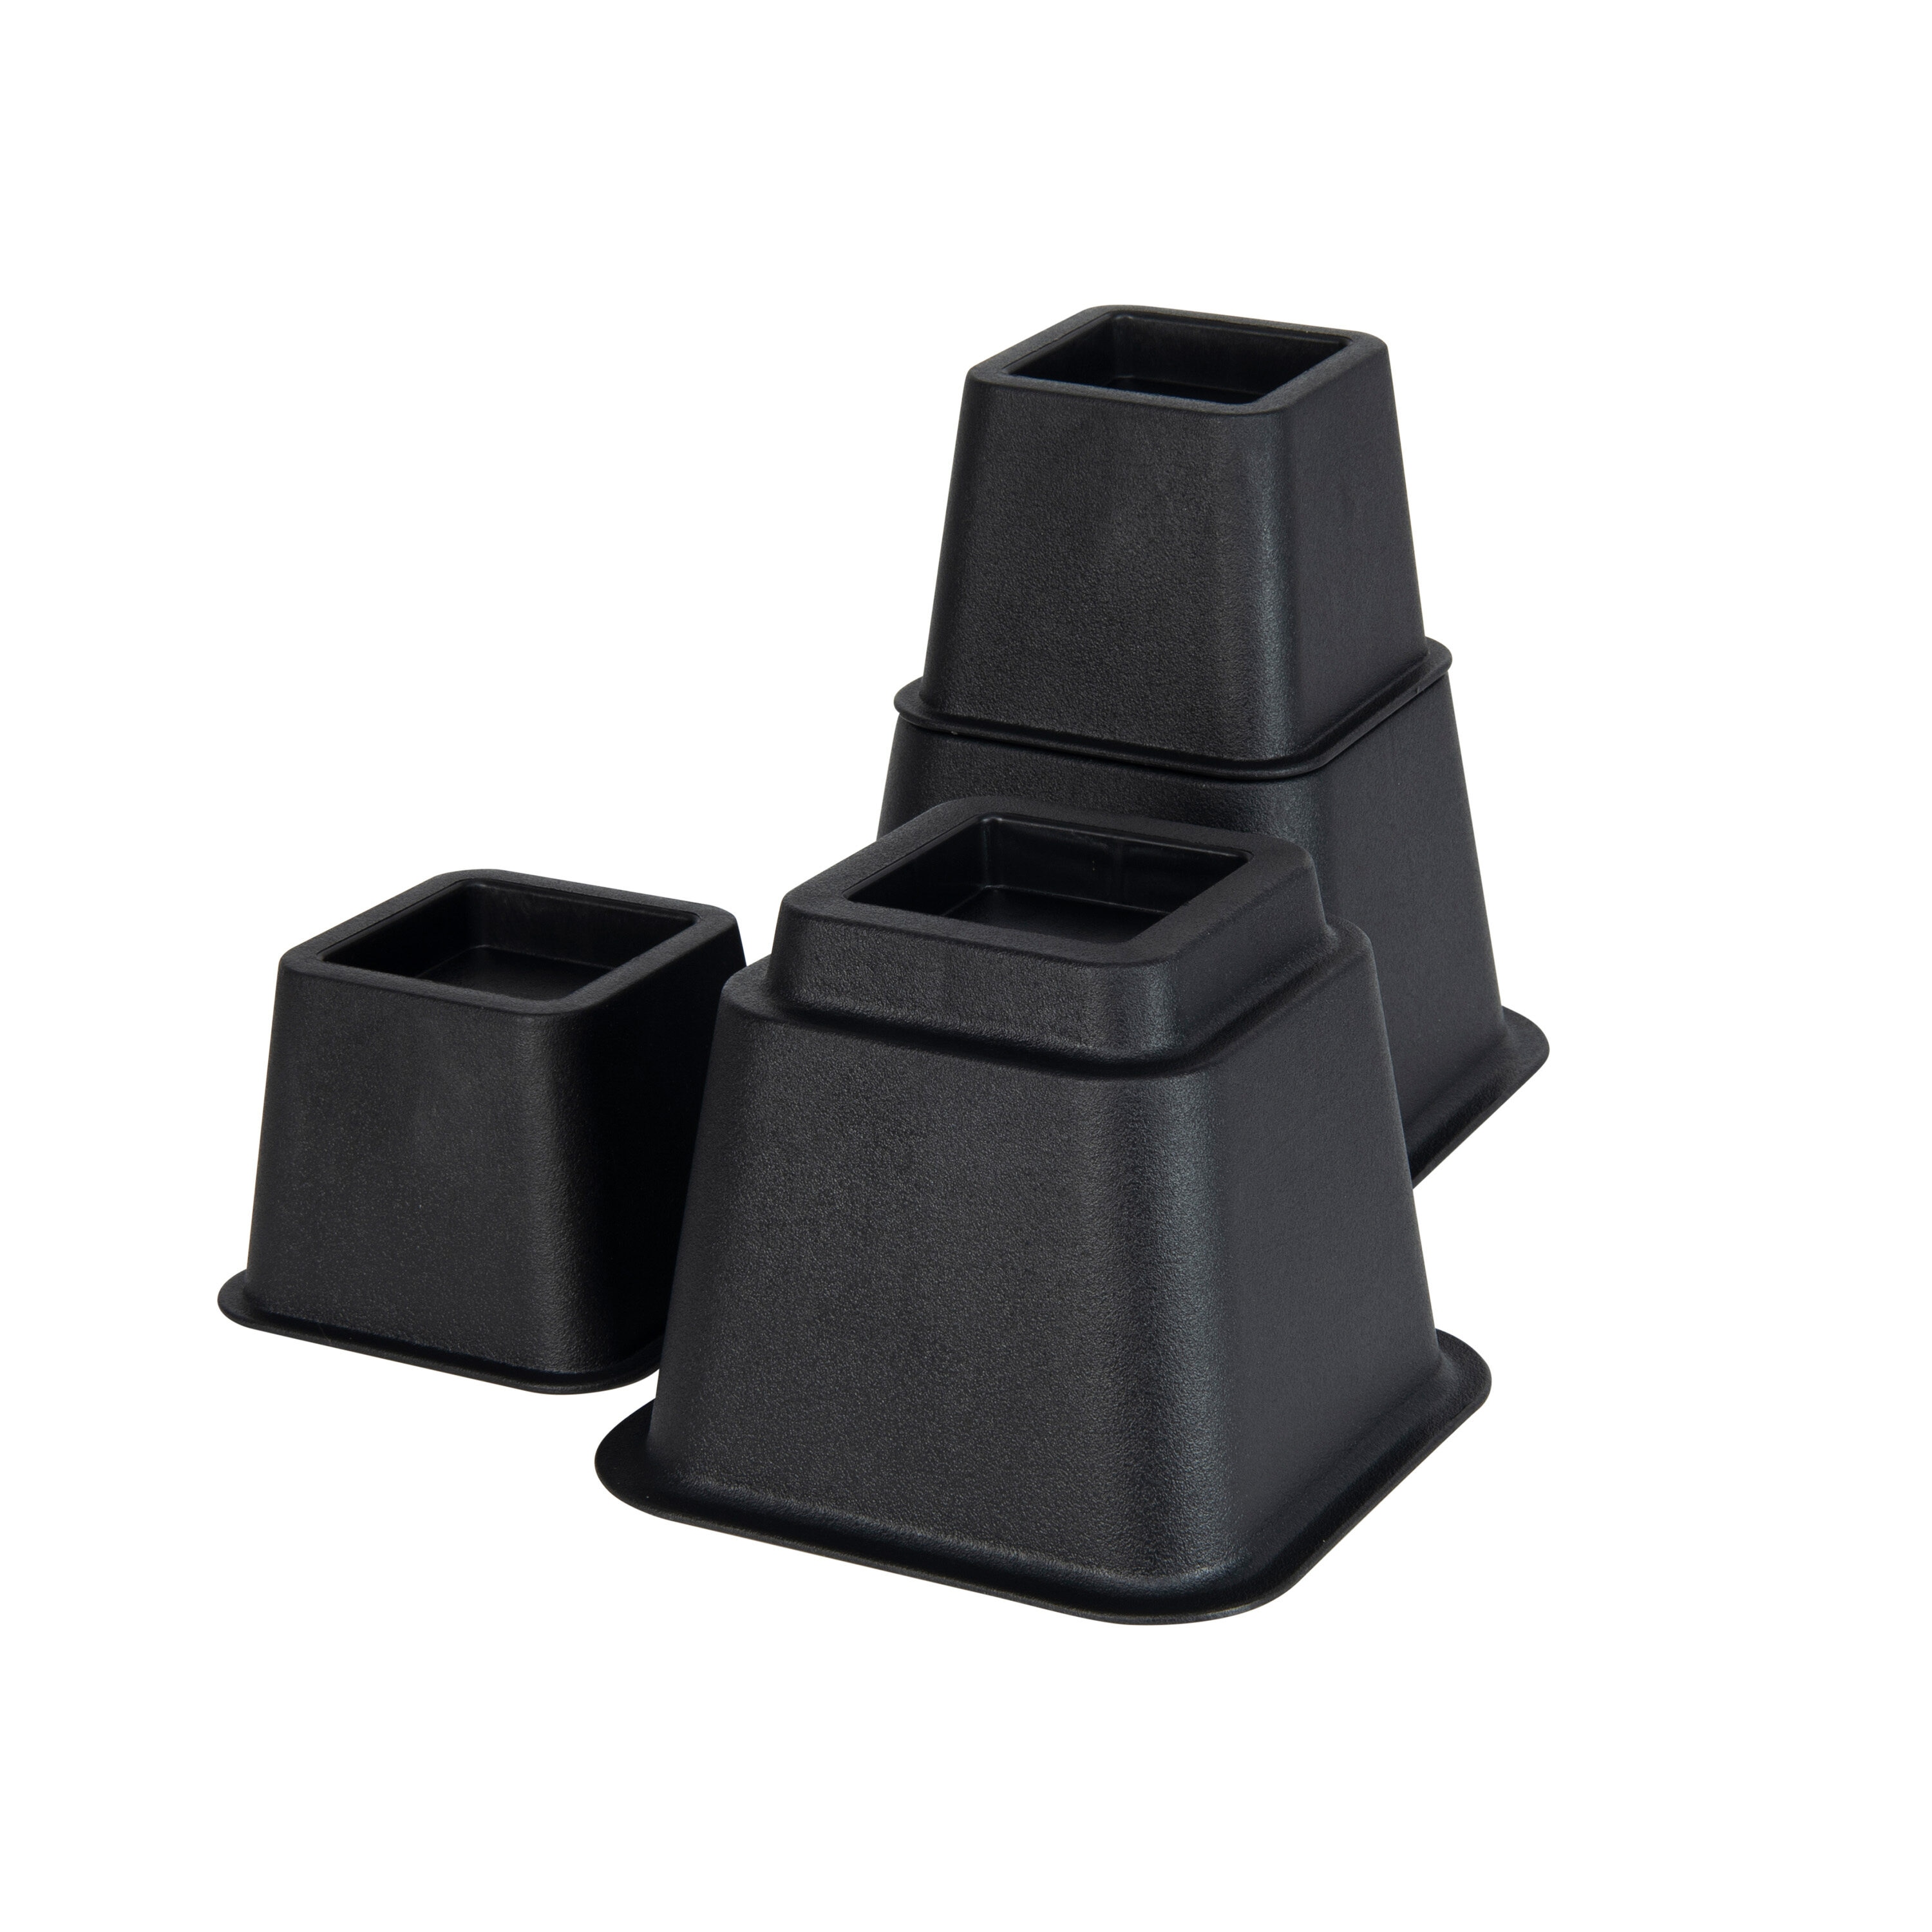  TomGear Bed Risers 8 inch, Heavy Duty Bed Lifts in